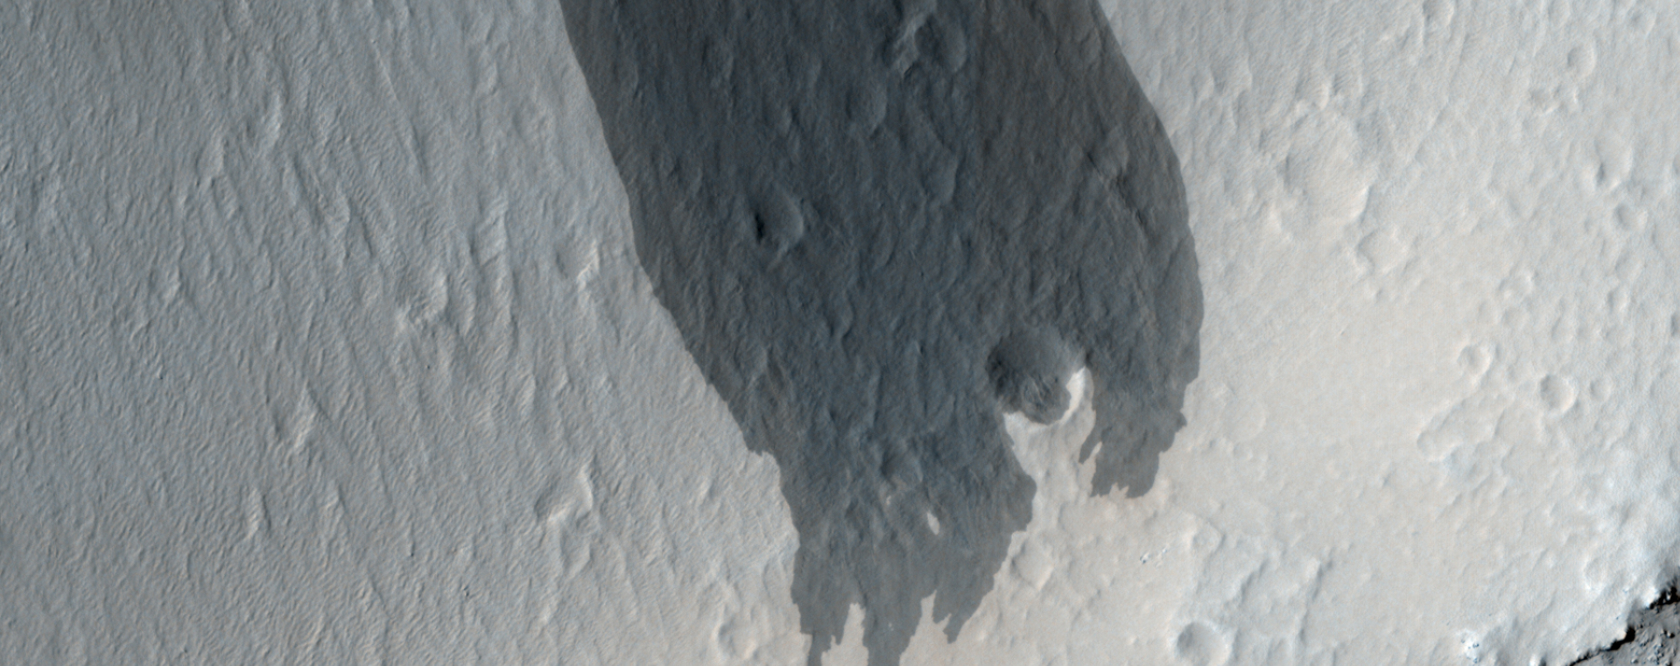 Big Impact-Triggered Dust Avalanche